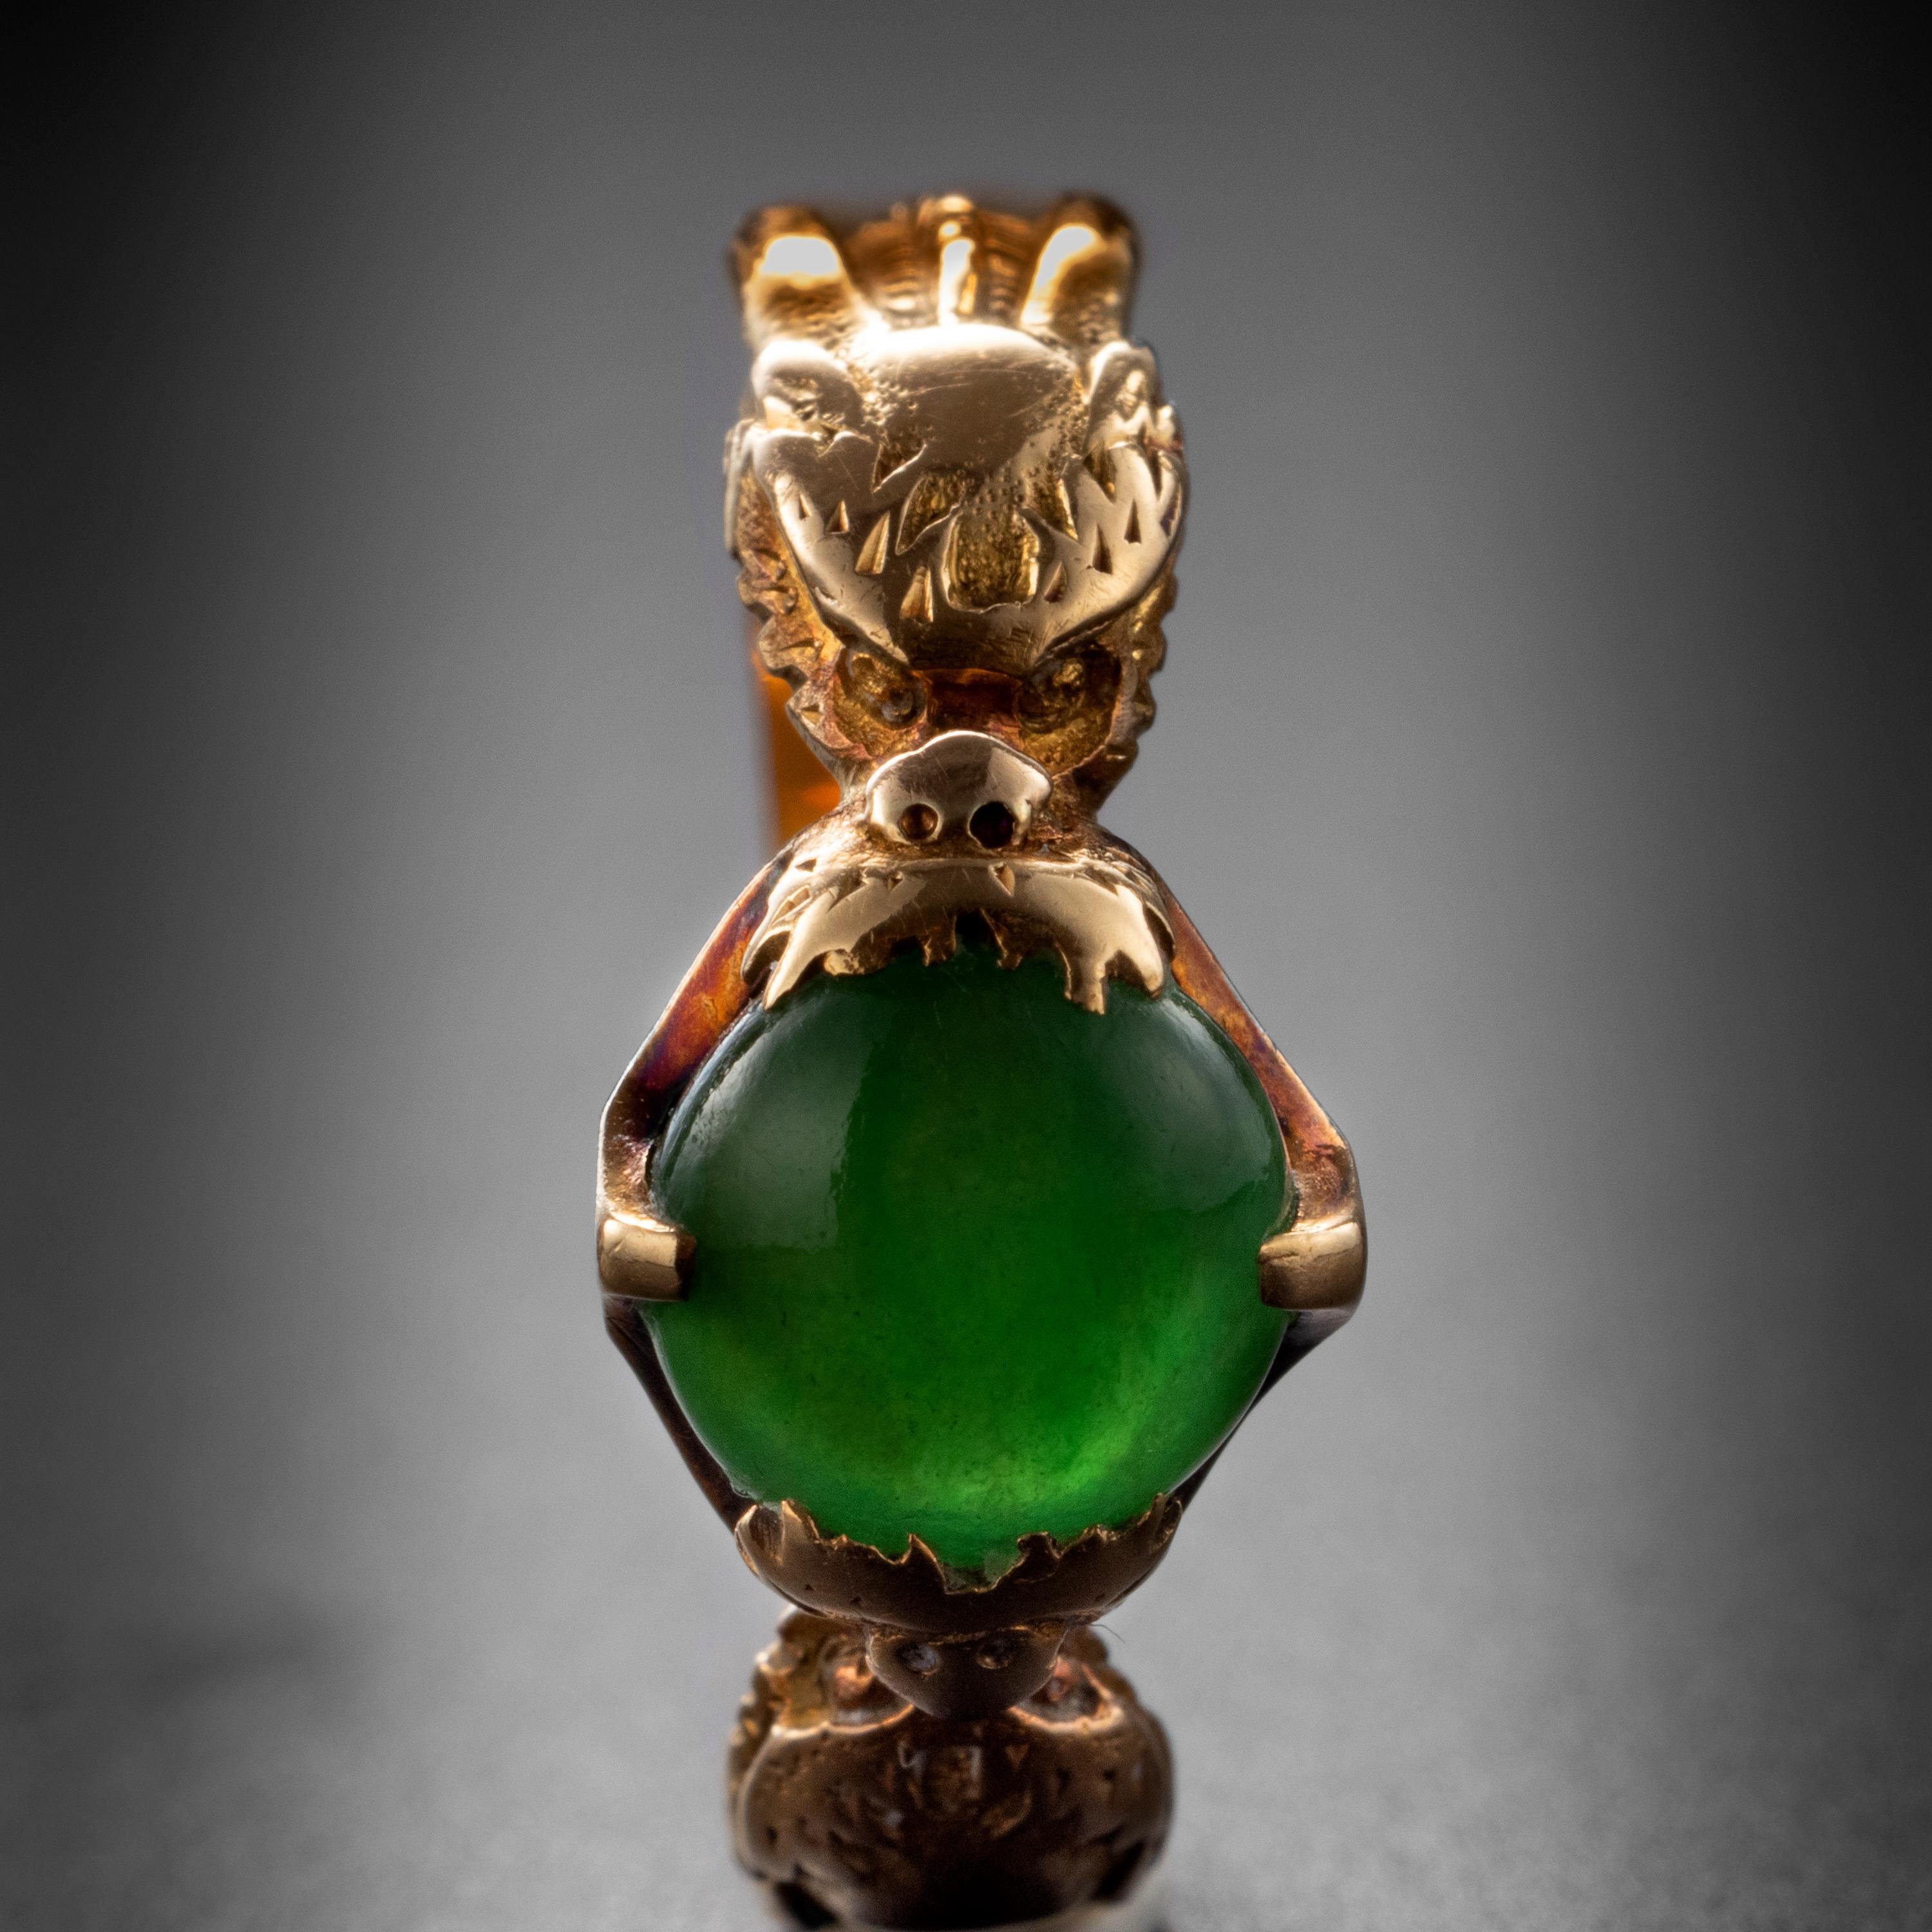 A round double-cabochon of fine emerald-green jade is gripped within the jaws of two figural dragons in this beautiful and whimsical antique Chinese ring from the late 1800s. The vivid green jade is so translucent that it appears to absorb and